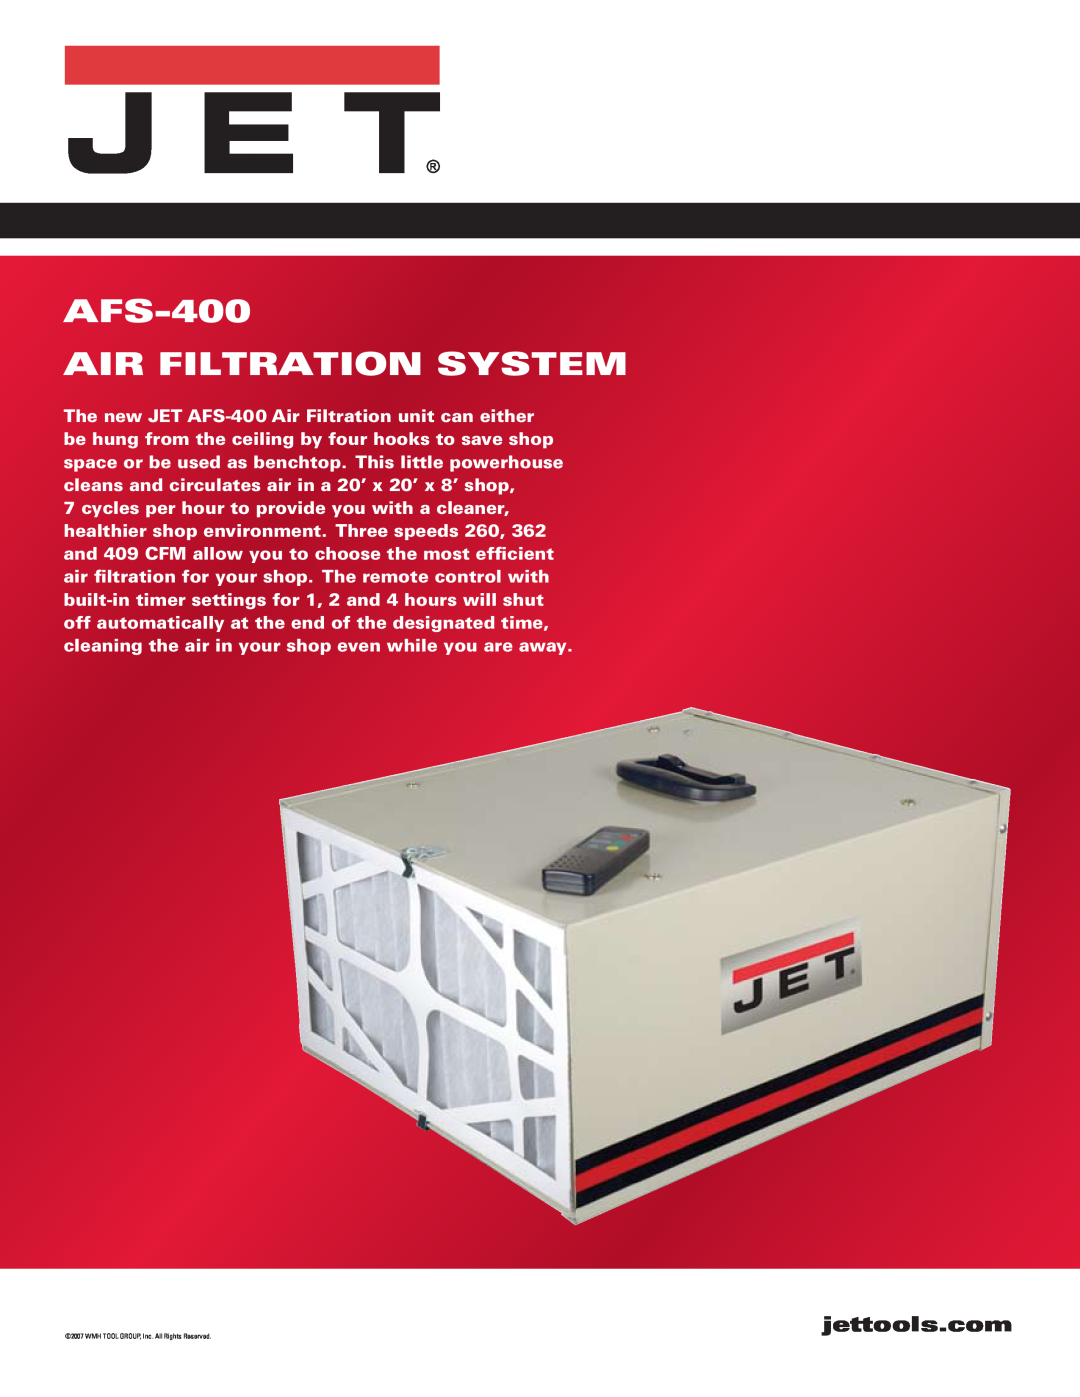 Jet Tools manual AFS-400 AIR FILTRATION SYSTEM 